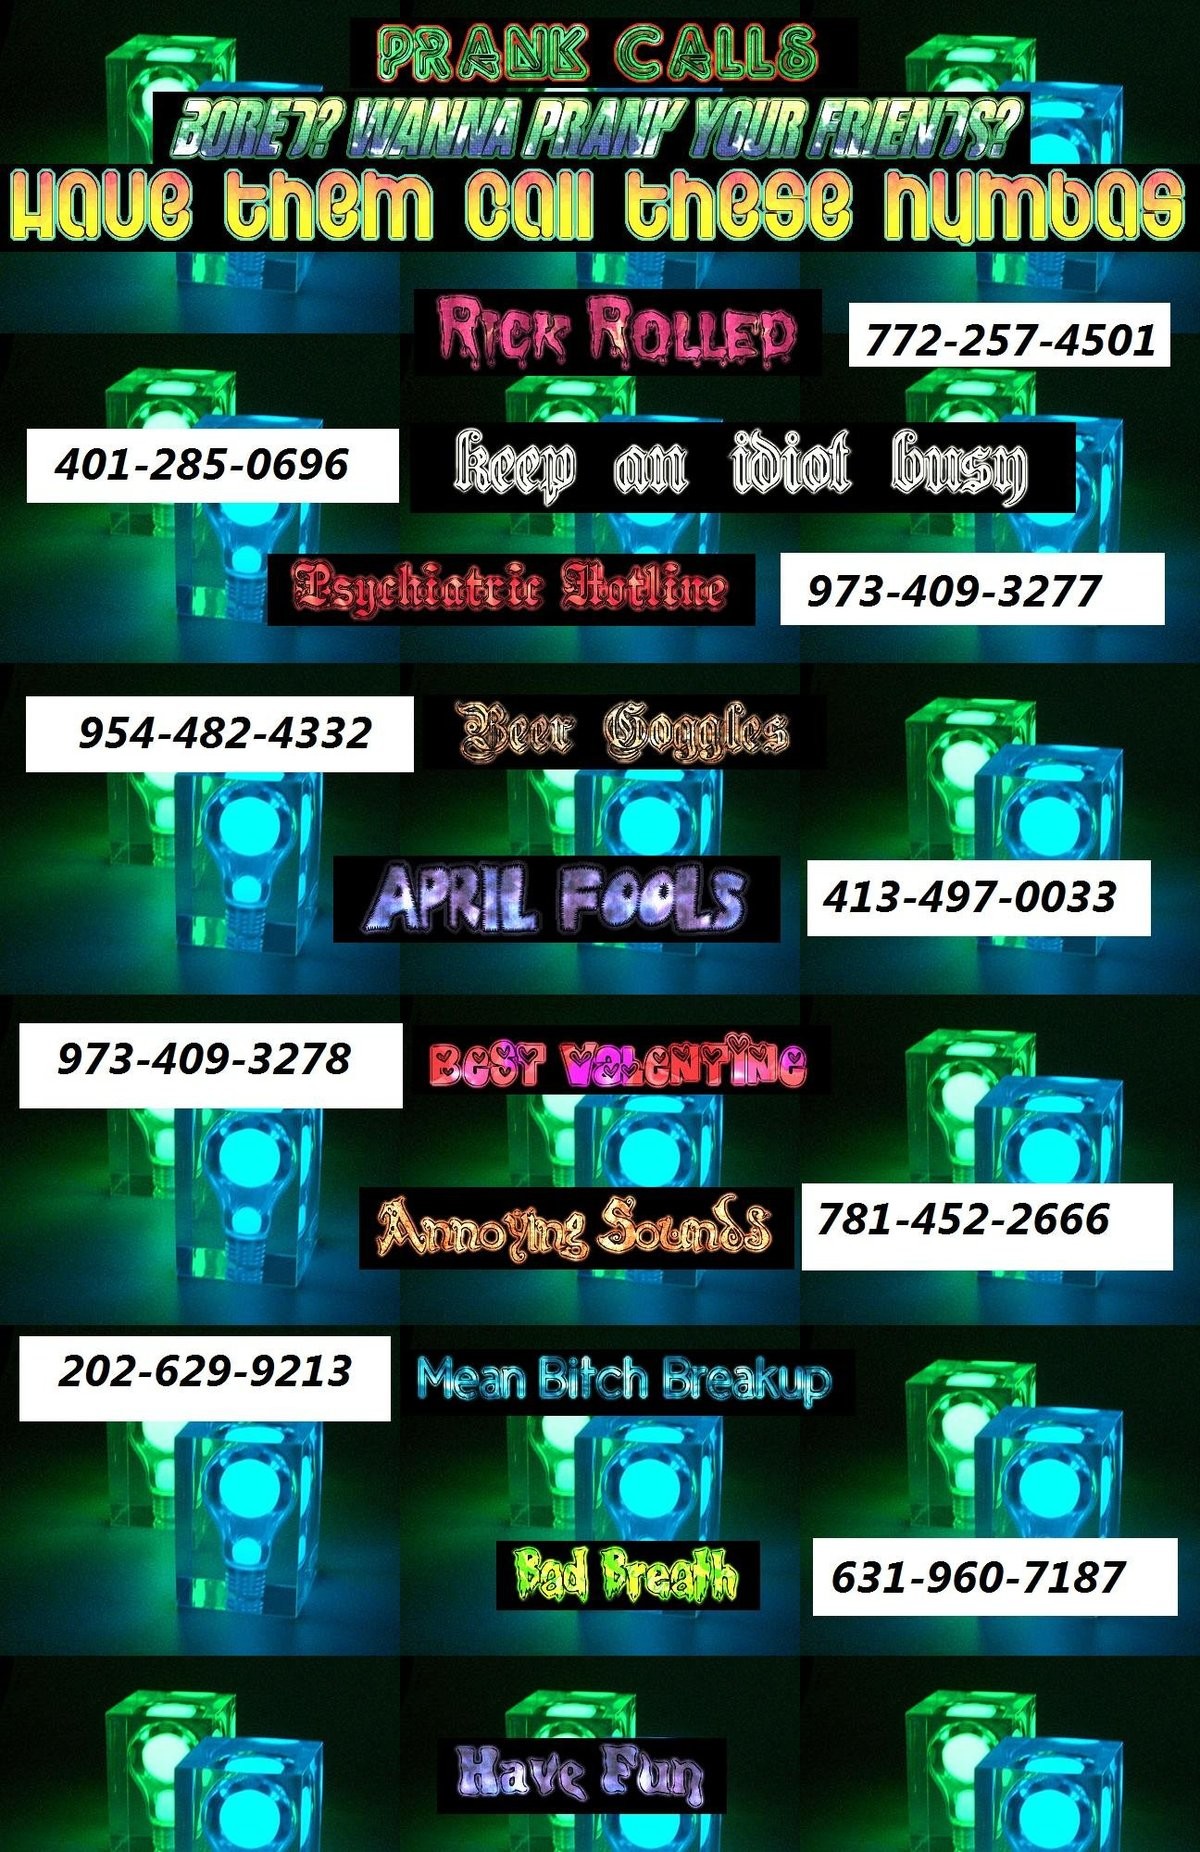 https://funnyjunk.com/funny_pictures/944365/Prank/. Wanna be a crank yanker? Try these numbers. Best way to do it is make a 3way call. Then Hang Up when your fr